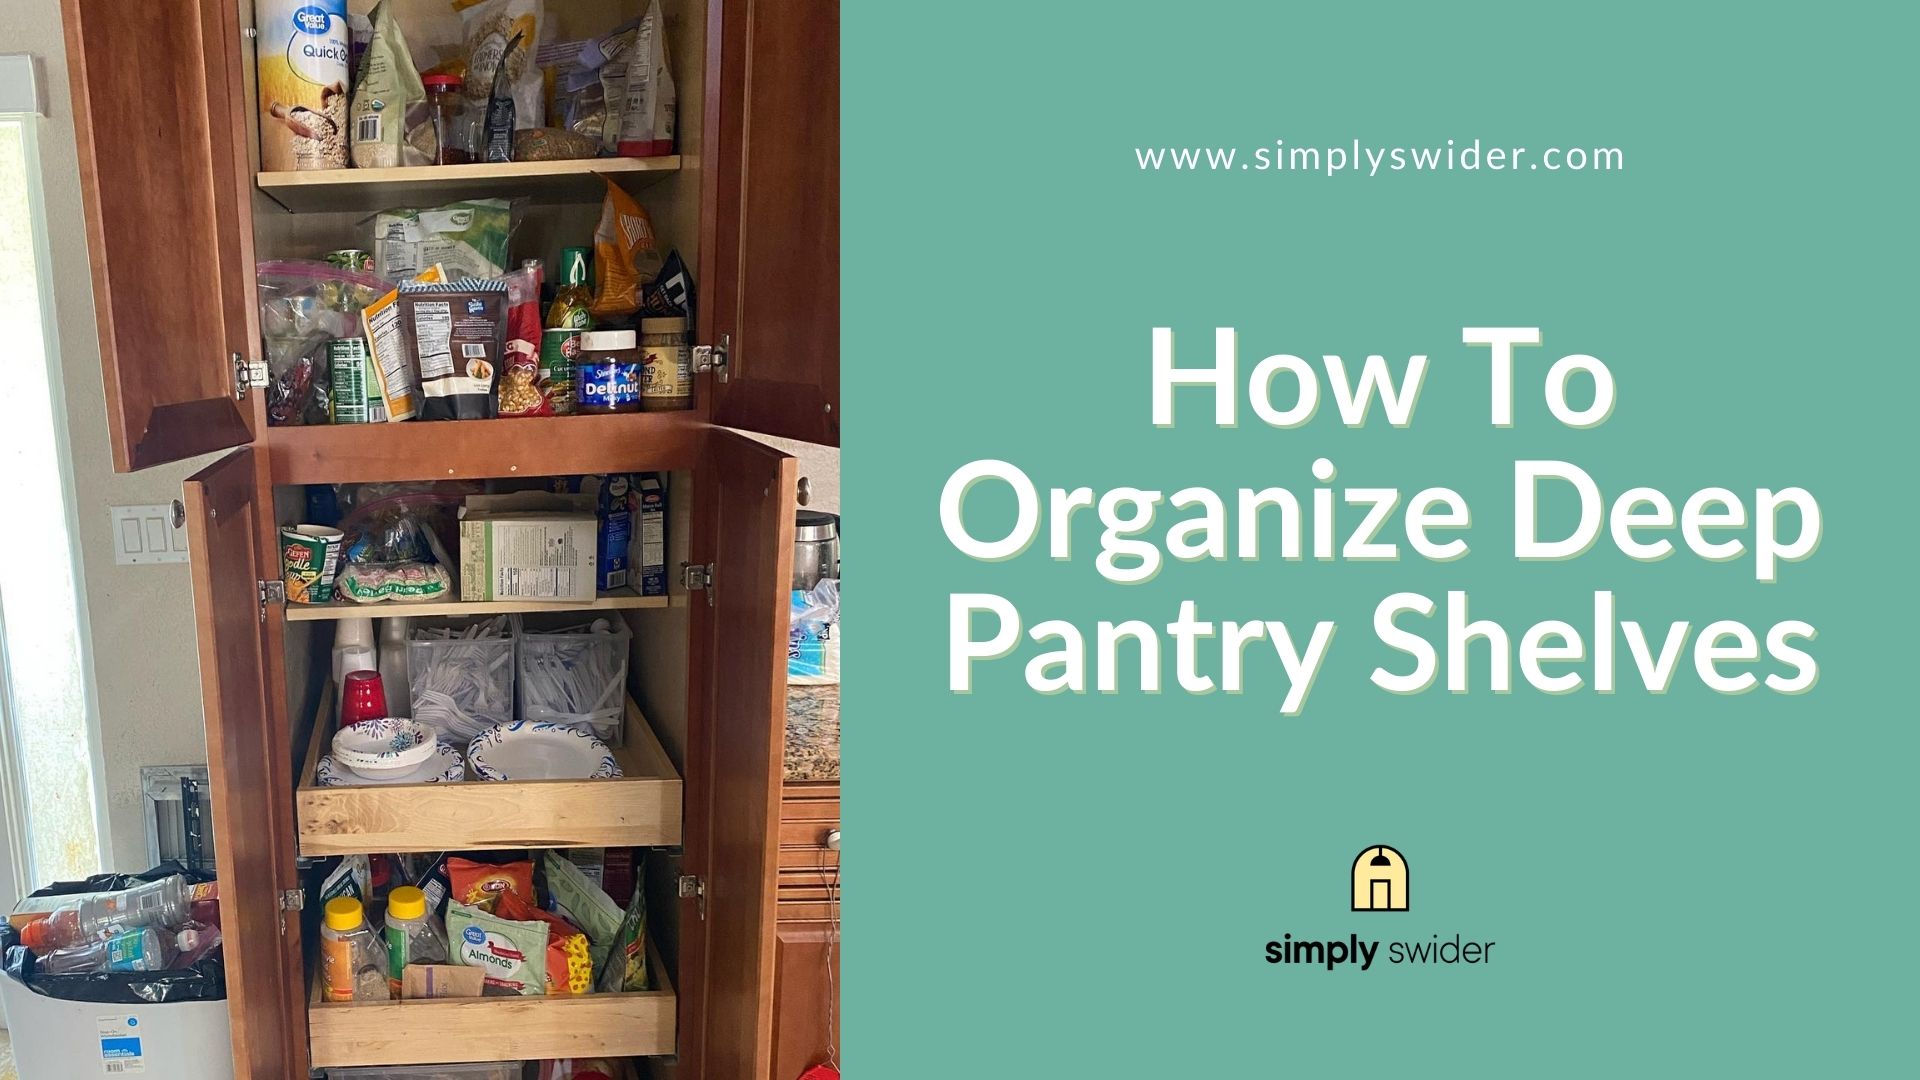 How To Organize Deep Pantry Shelves? Try These 5 Helpful Steps 